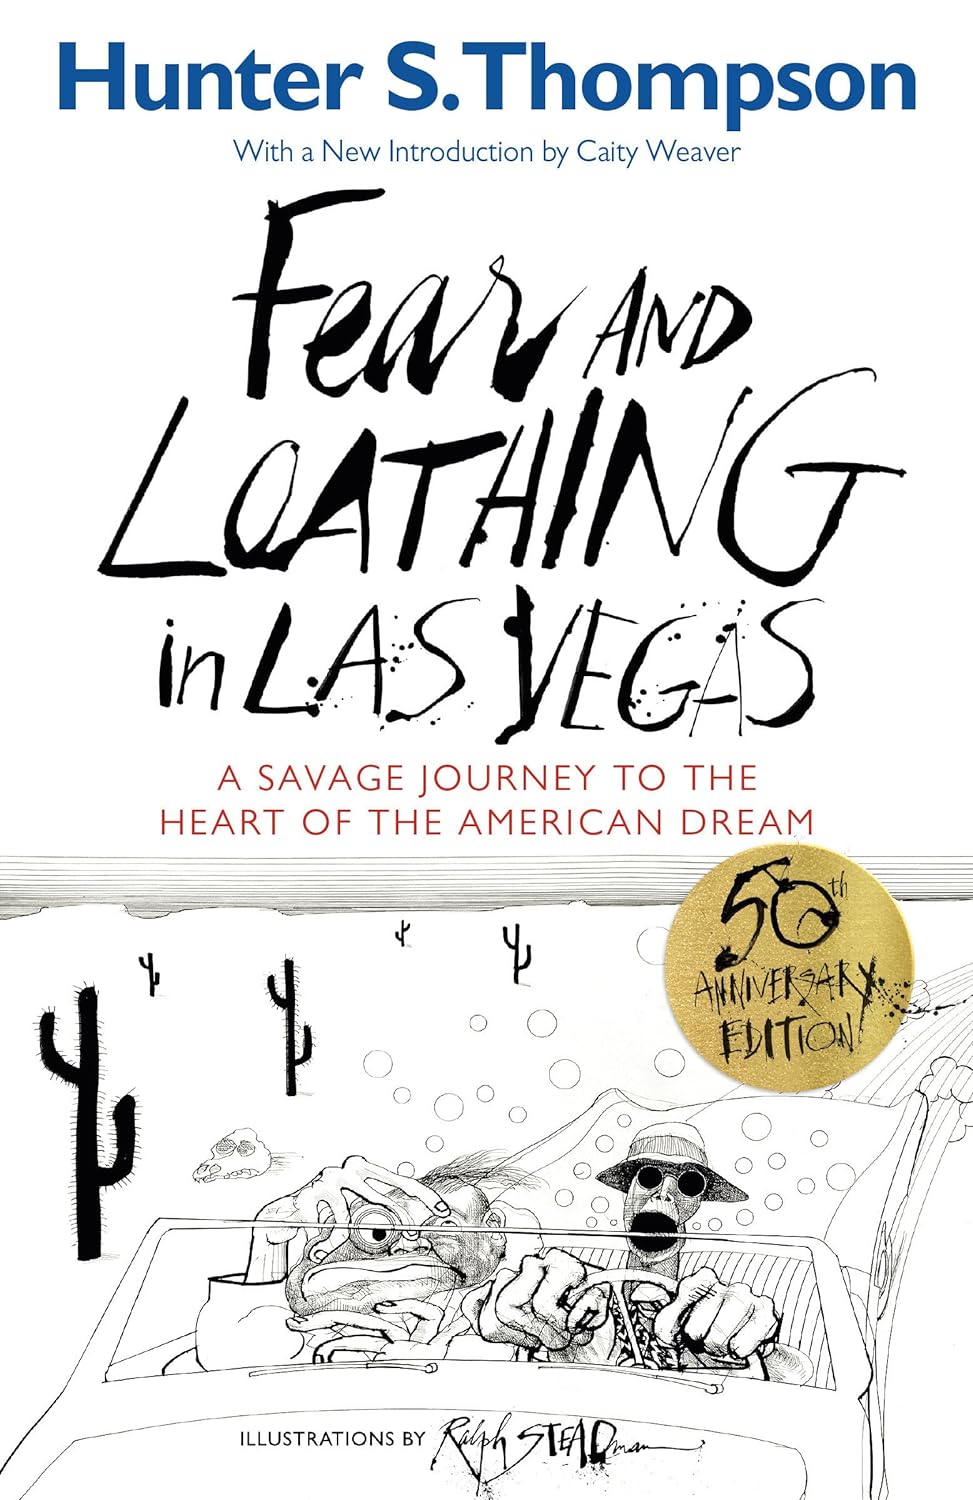 Fear and Loathing in Las Vegas A Savage Journey to the Heart of the American Dream by Hunter S. Thompson (1971)